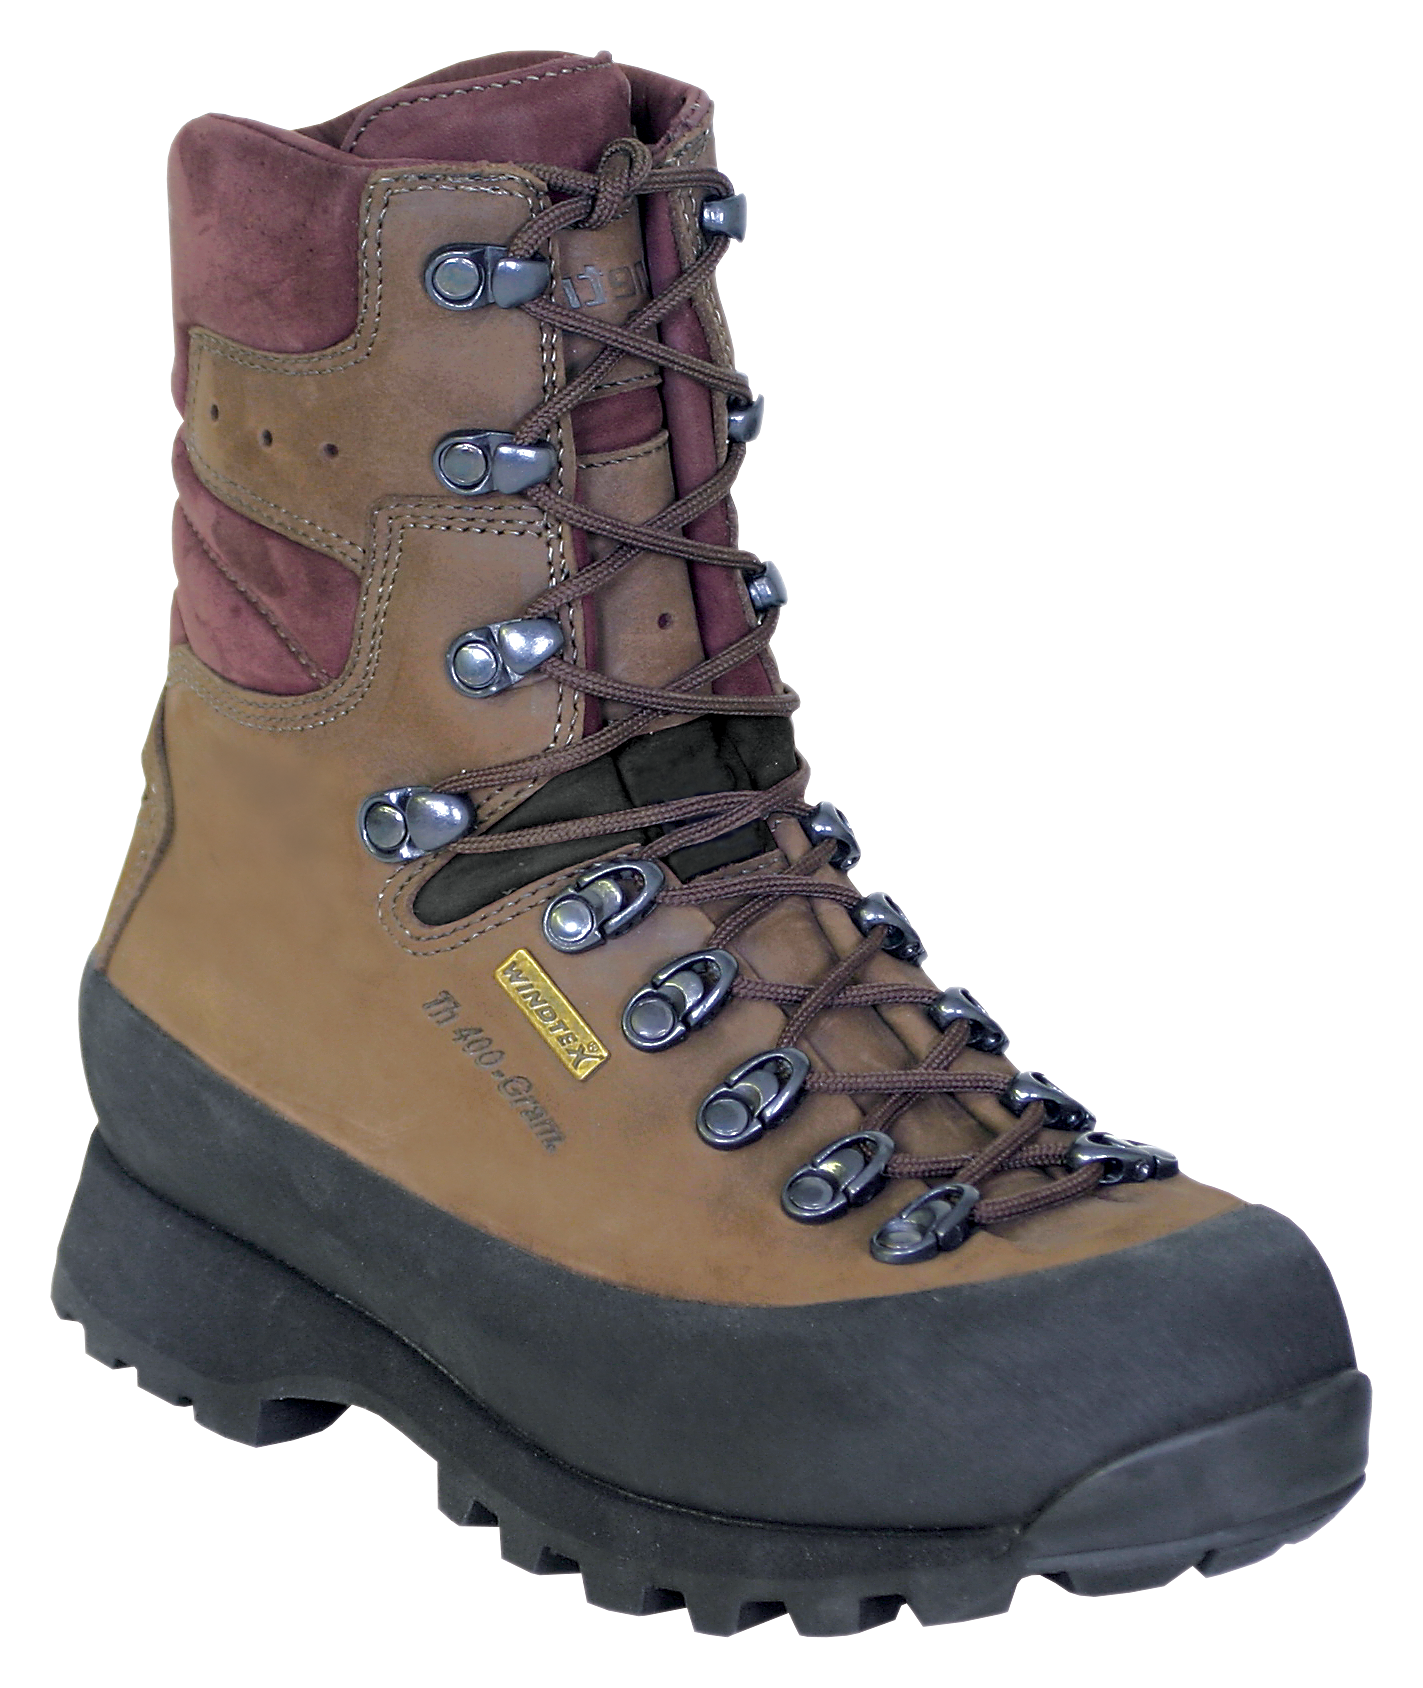 Kenetrek Mountain Extreme 400 Insulated Waterproof Hunting Boots for Ladies - Brown - 6.5M